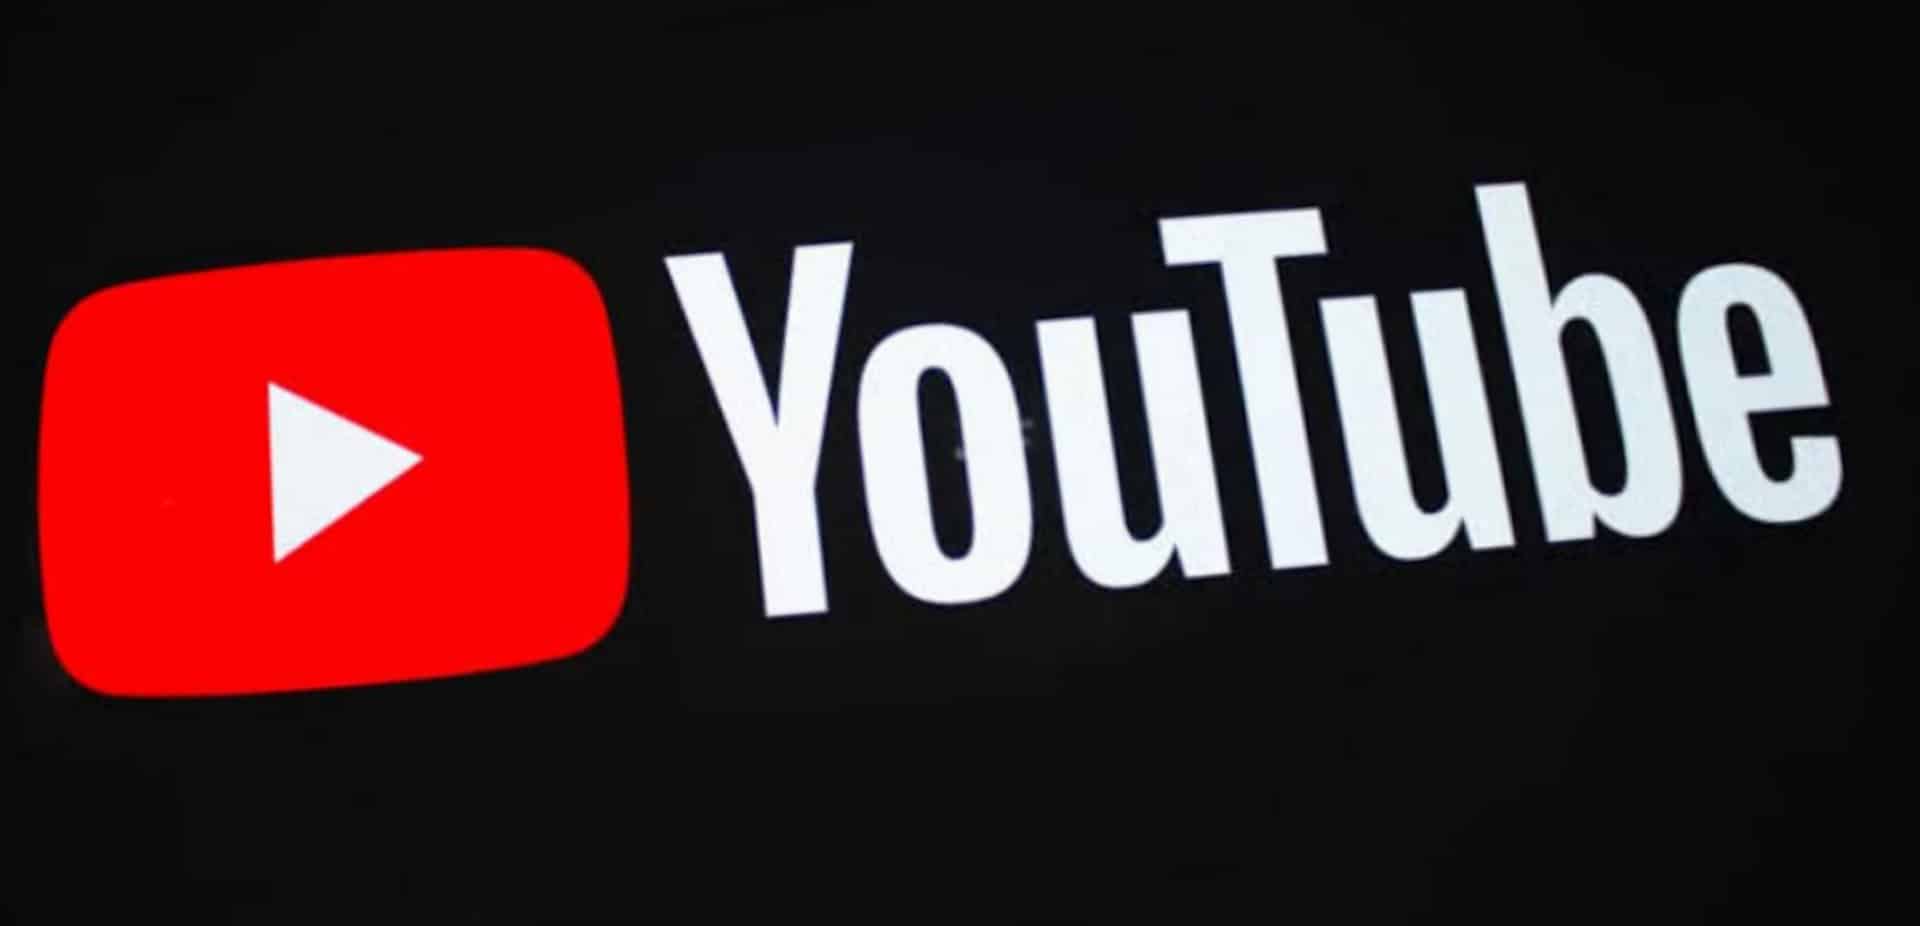 YouTube for Android Gets 4K HDR Streaming Support